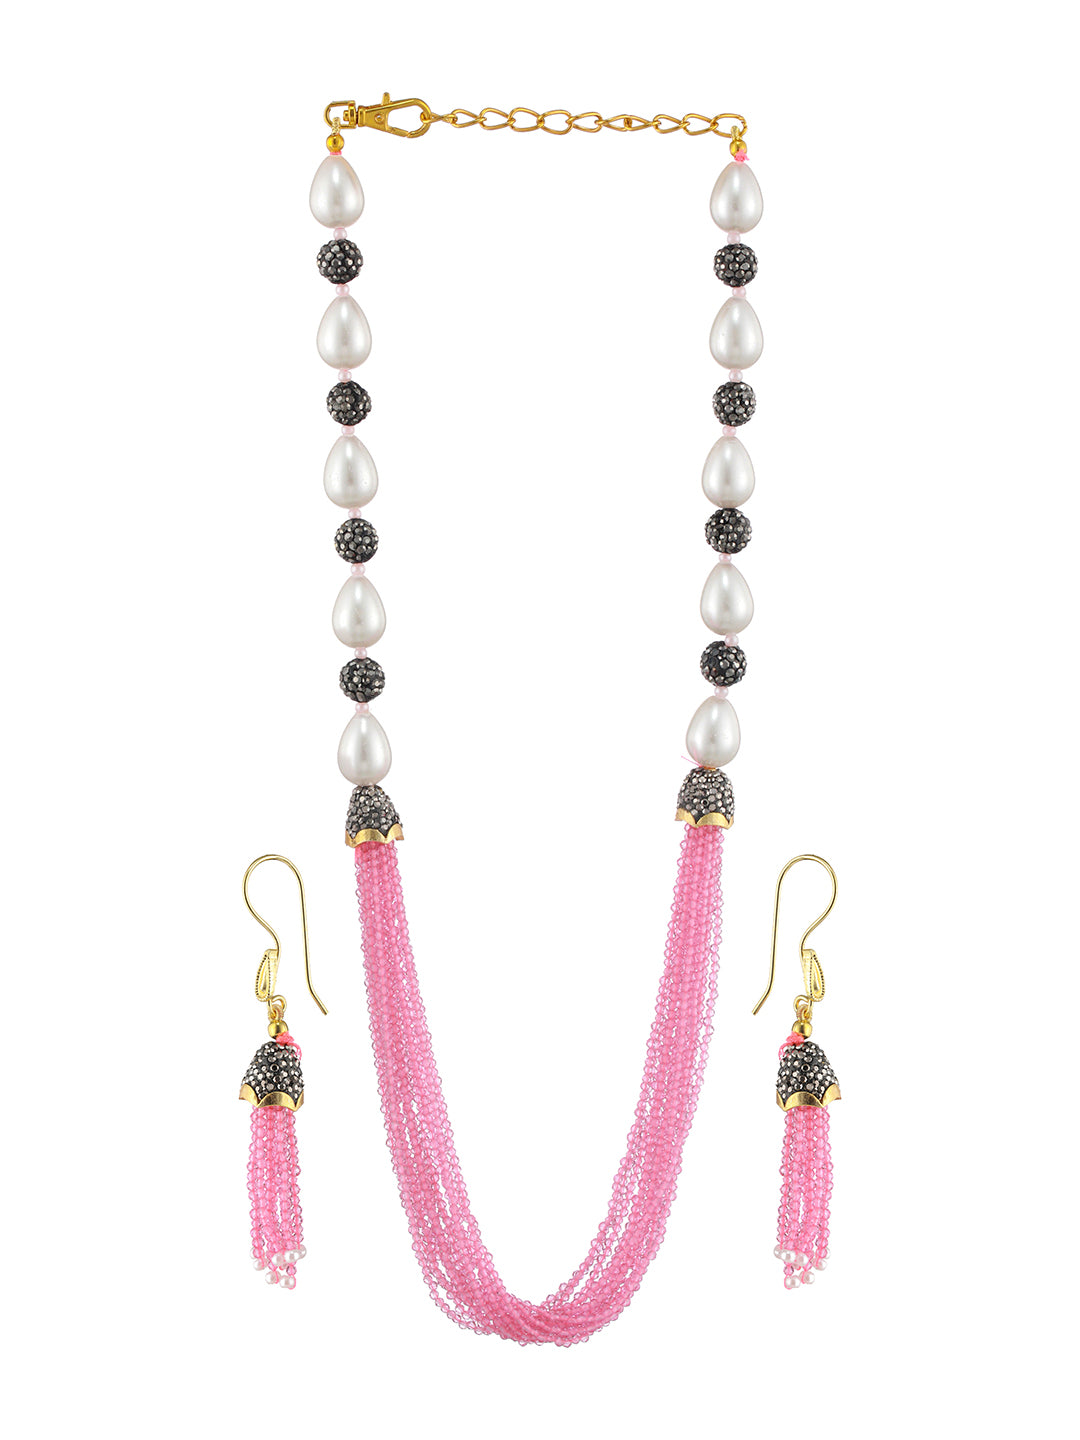 Gold-Plated Beaded Necklace and Earrings